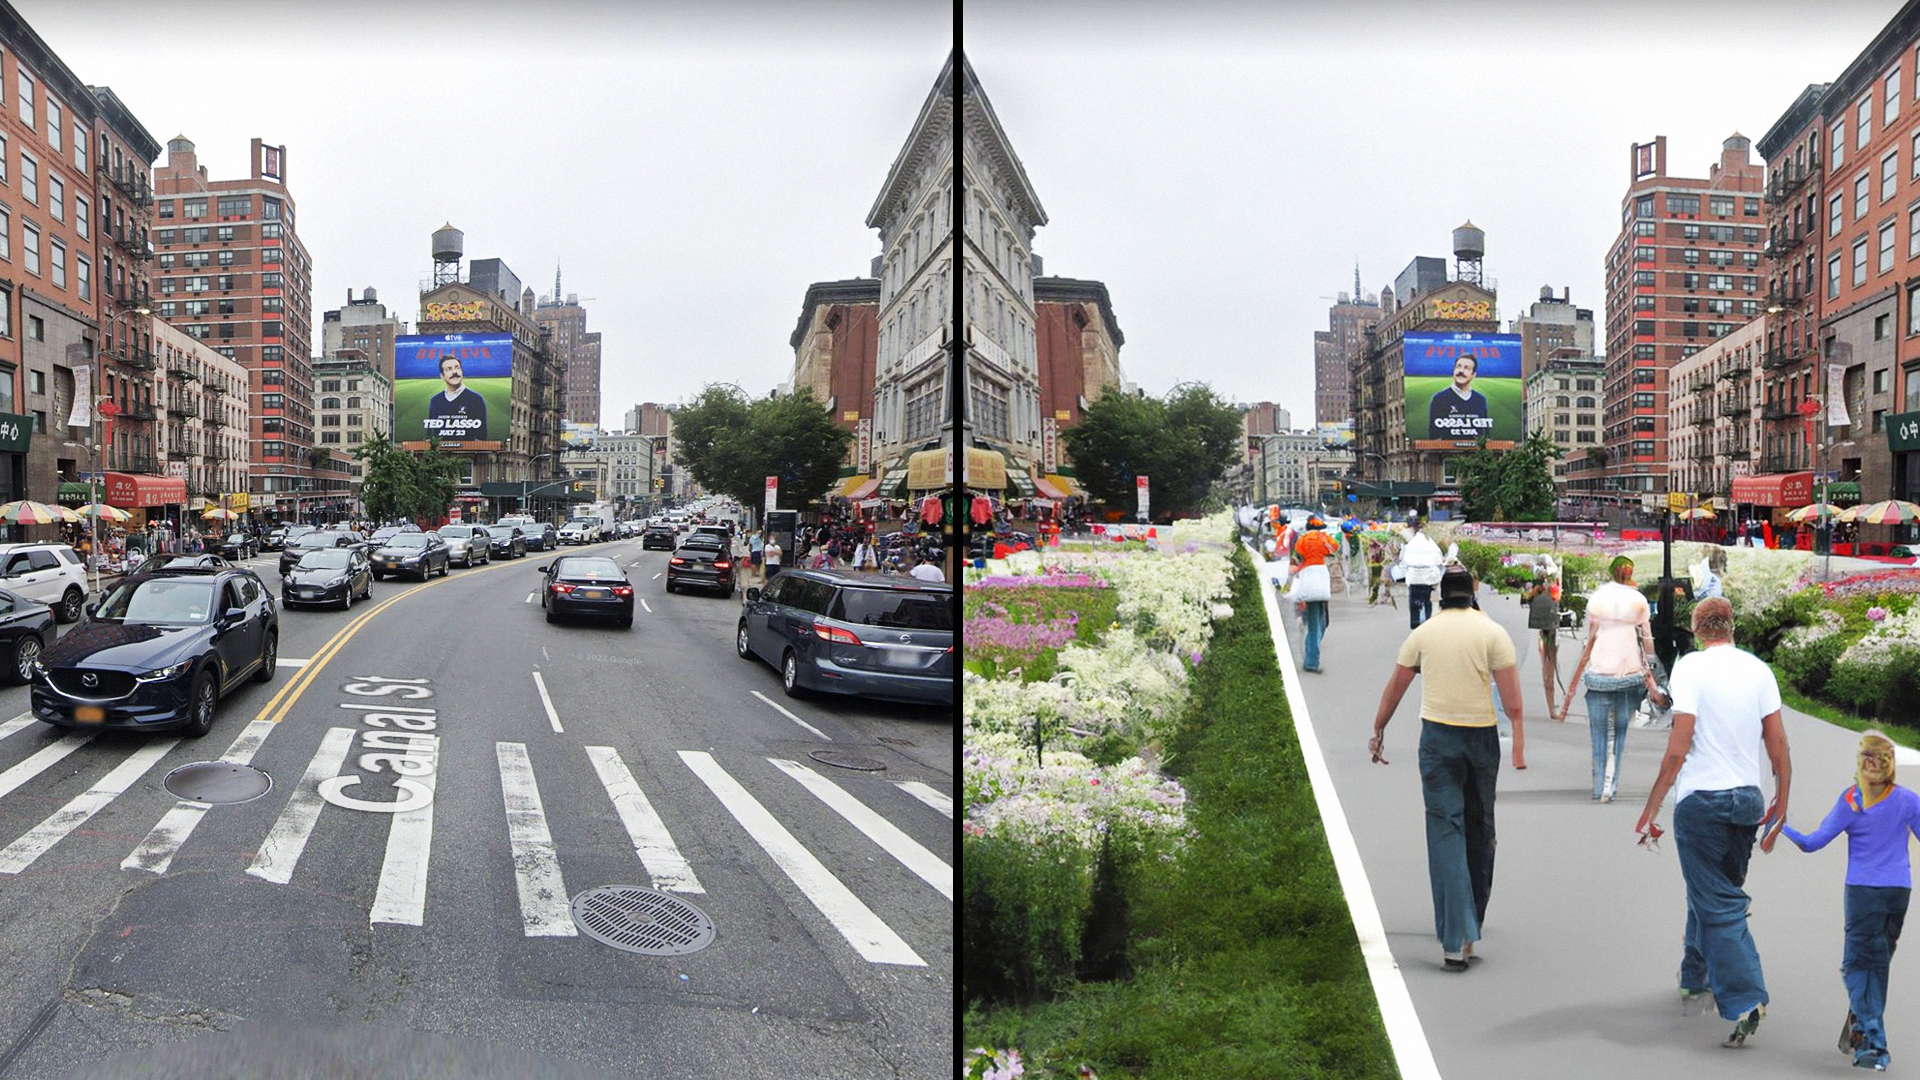 Amateur urban planners use DALL-E to re-imagine cities without cars